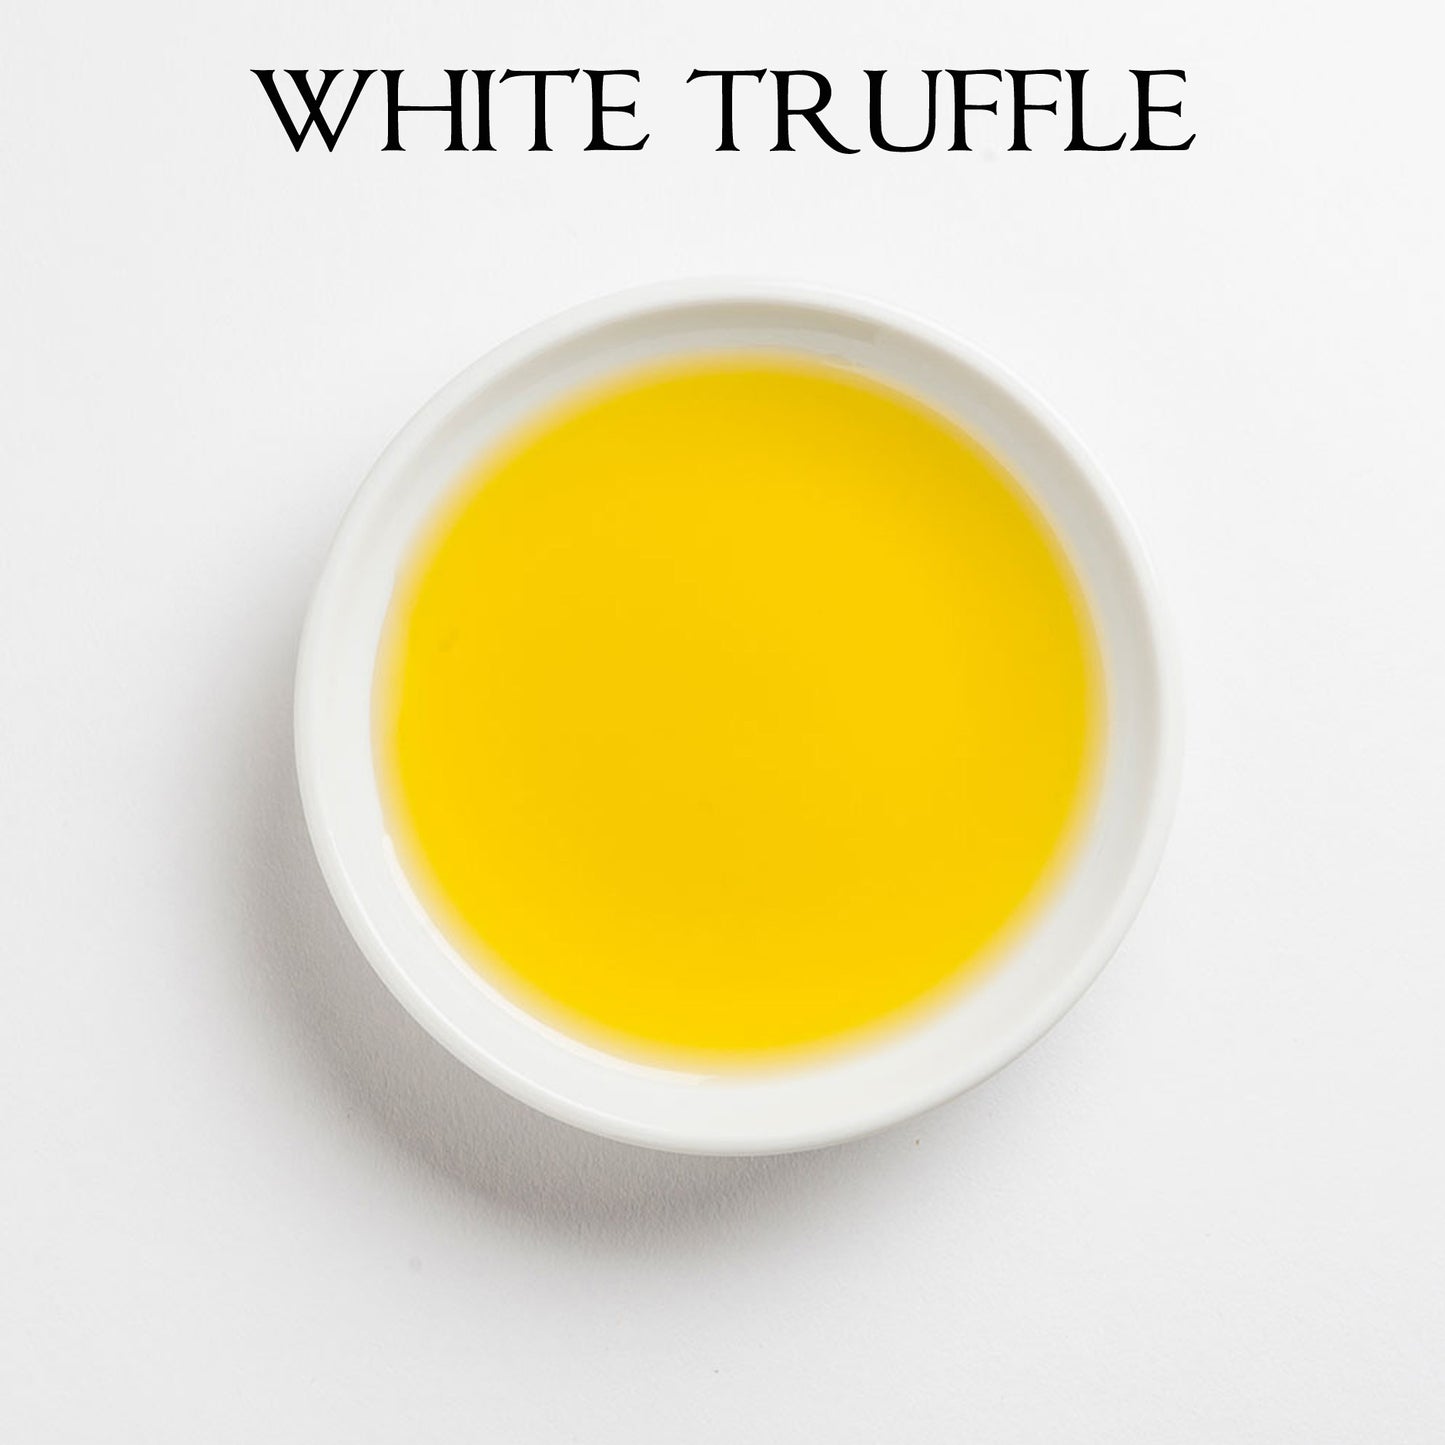 WHITE TRUFFLE Infused Olive Oil